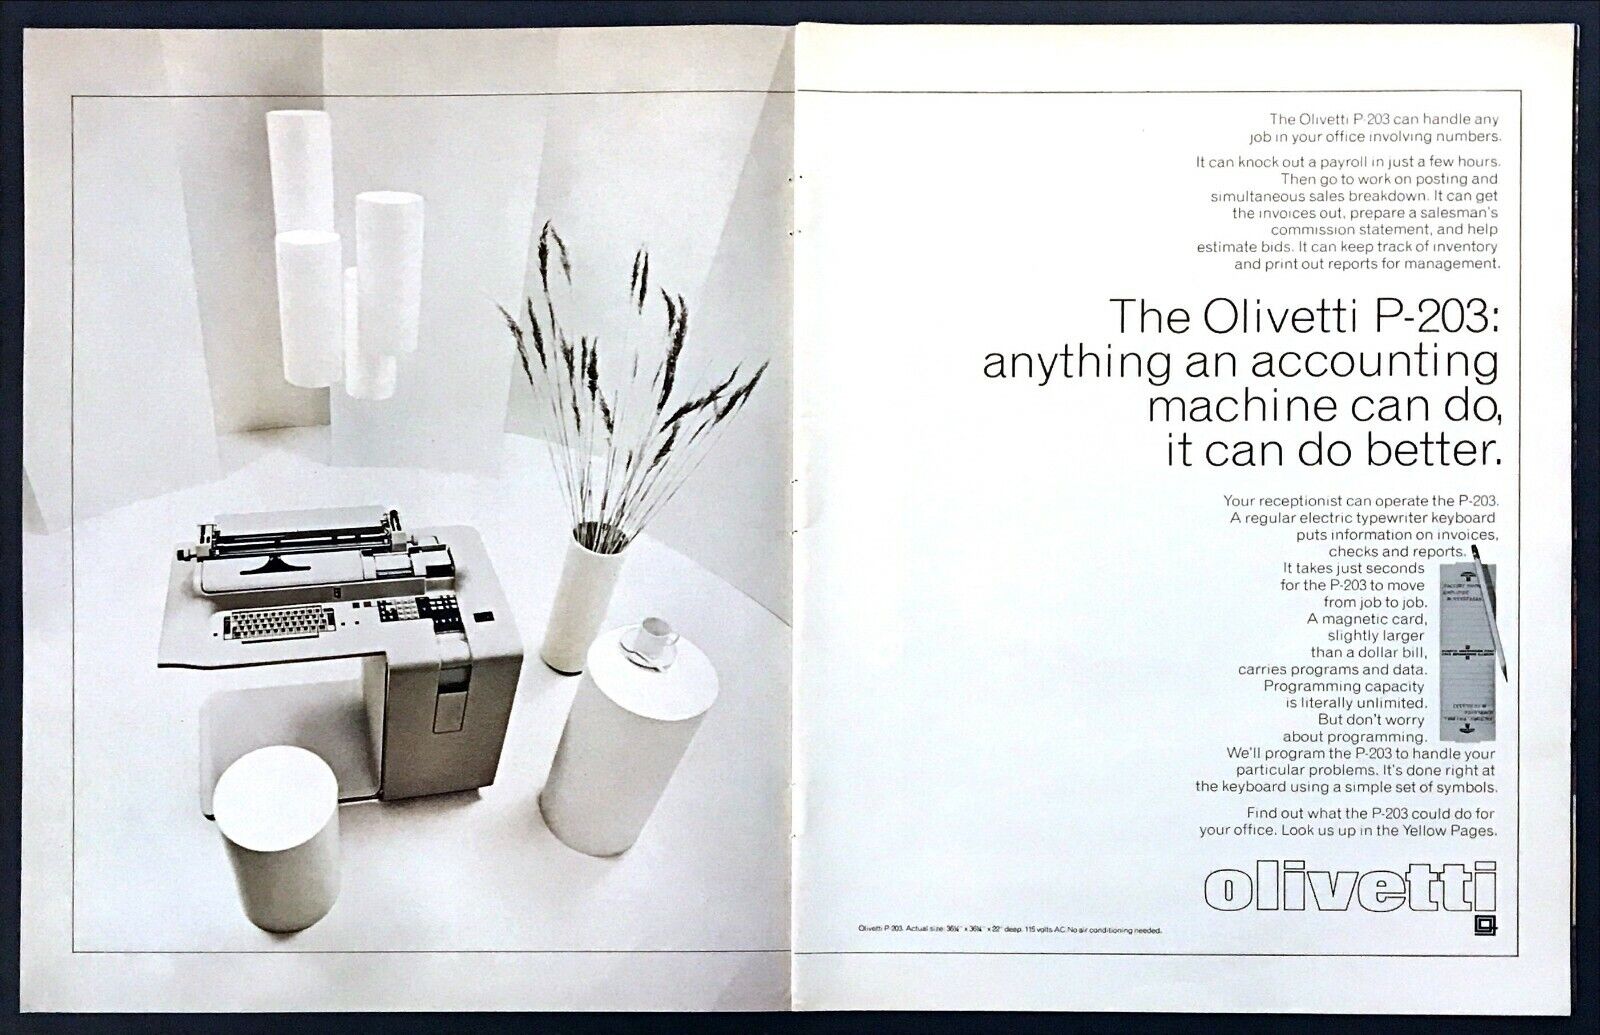 1969 Olivetti P-203 Accounting Machine photo Does Better 2-page vintage print ad